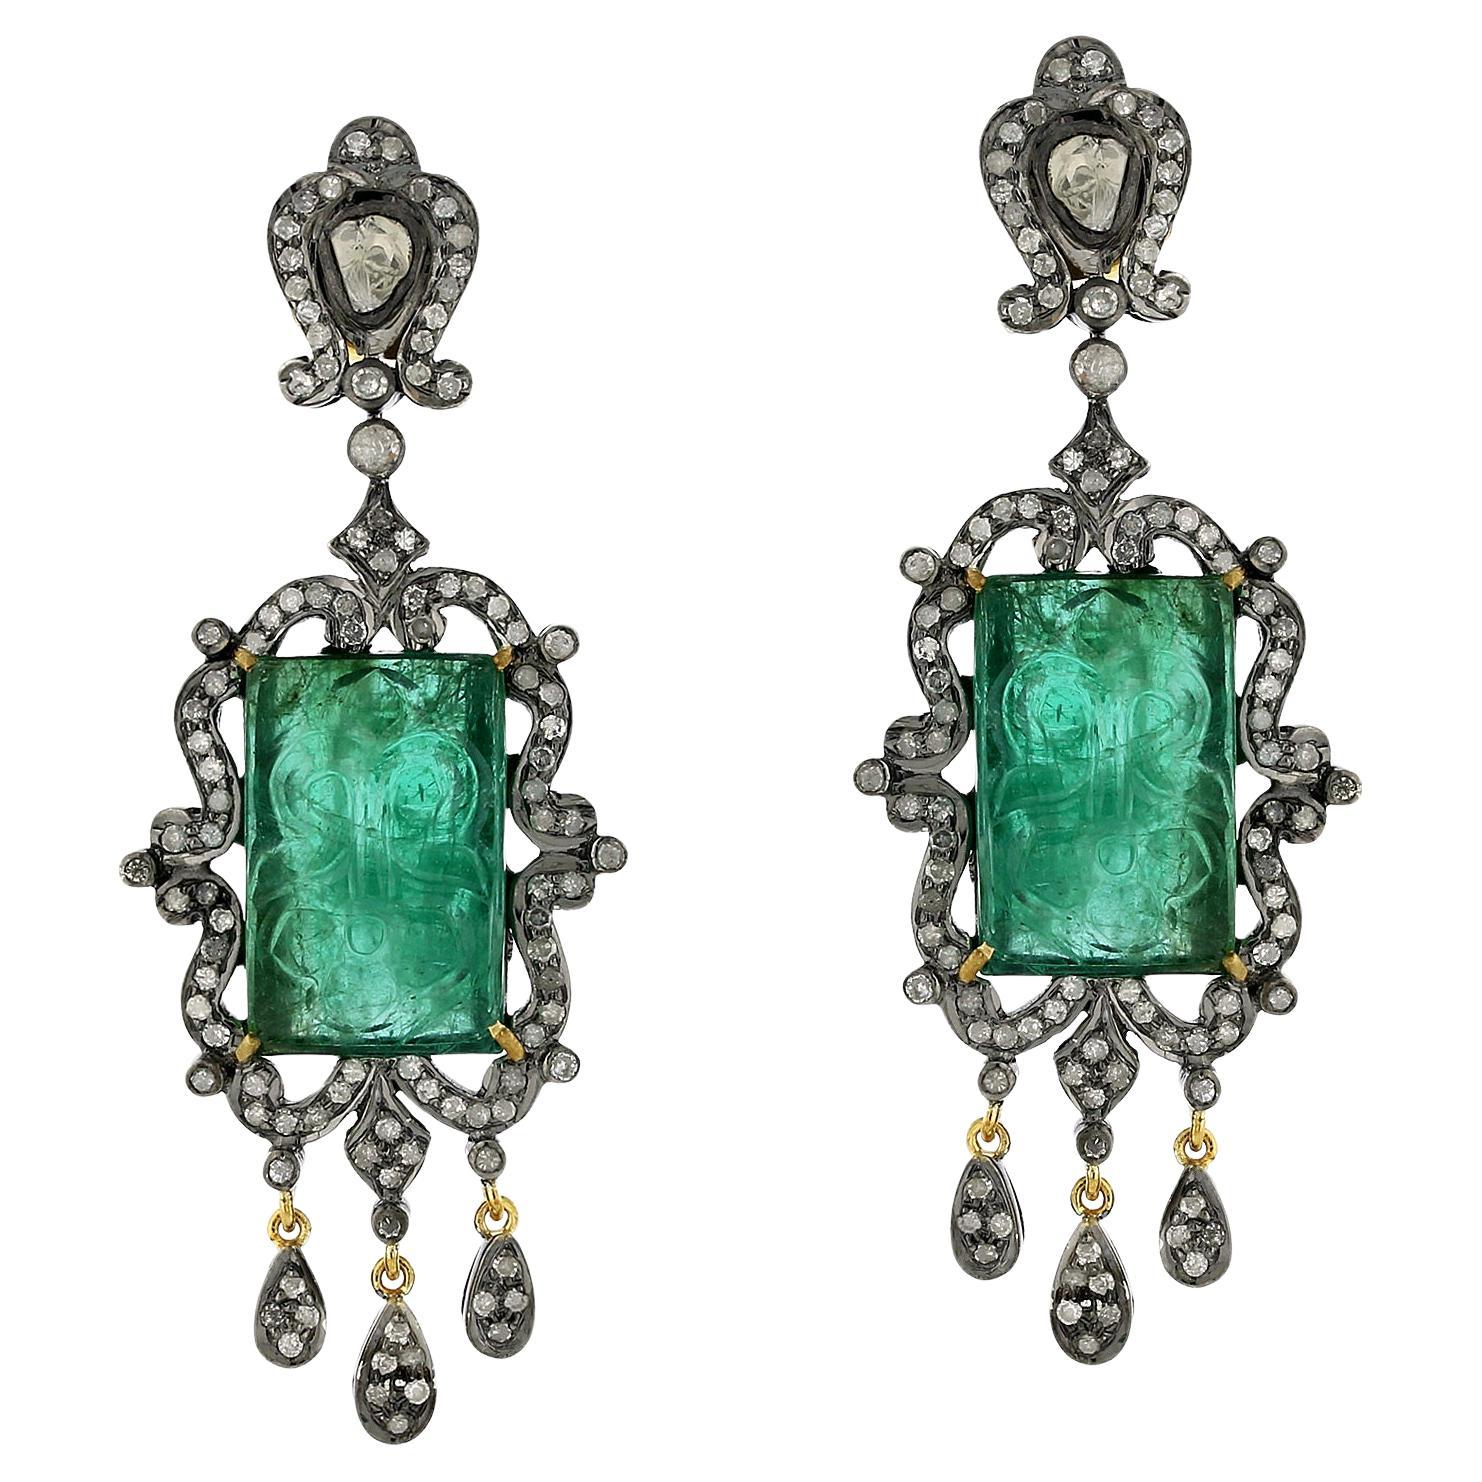 28.9ct Carved Emerald Dangle Earrings With Diamonds In 18k White Gold & Silver